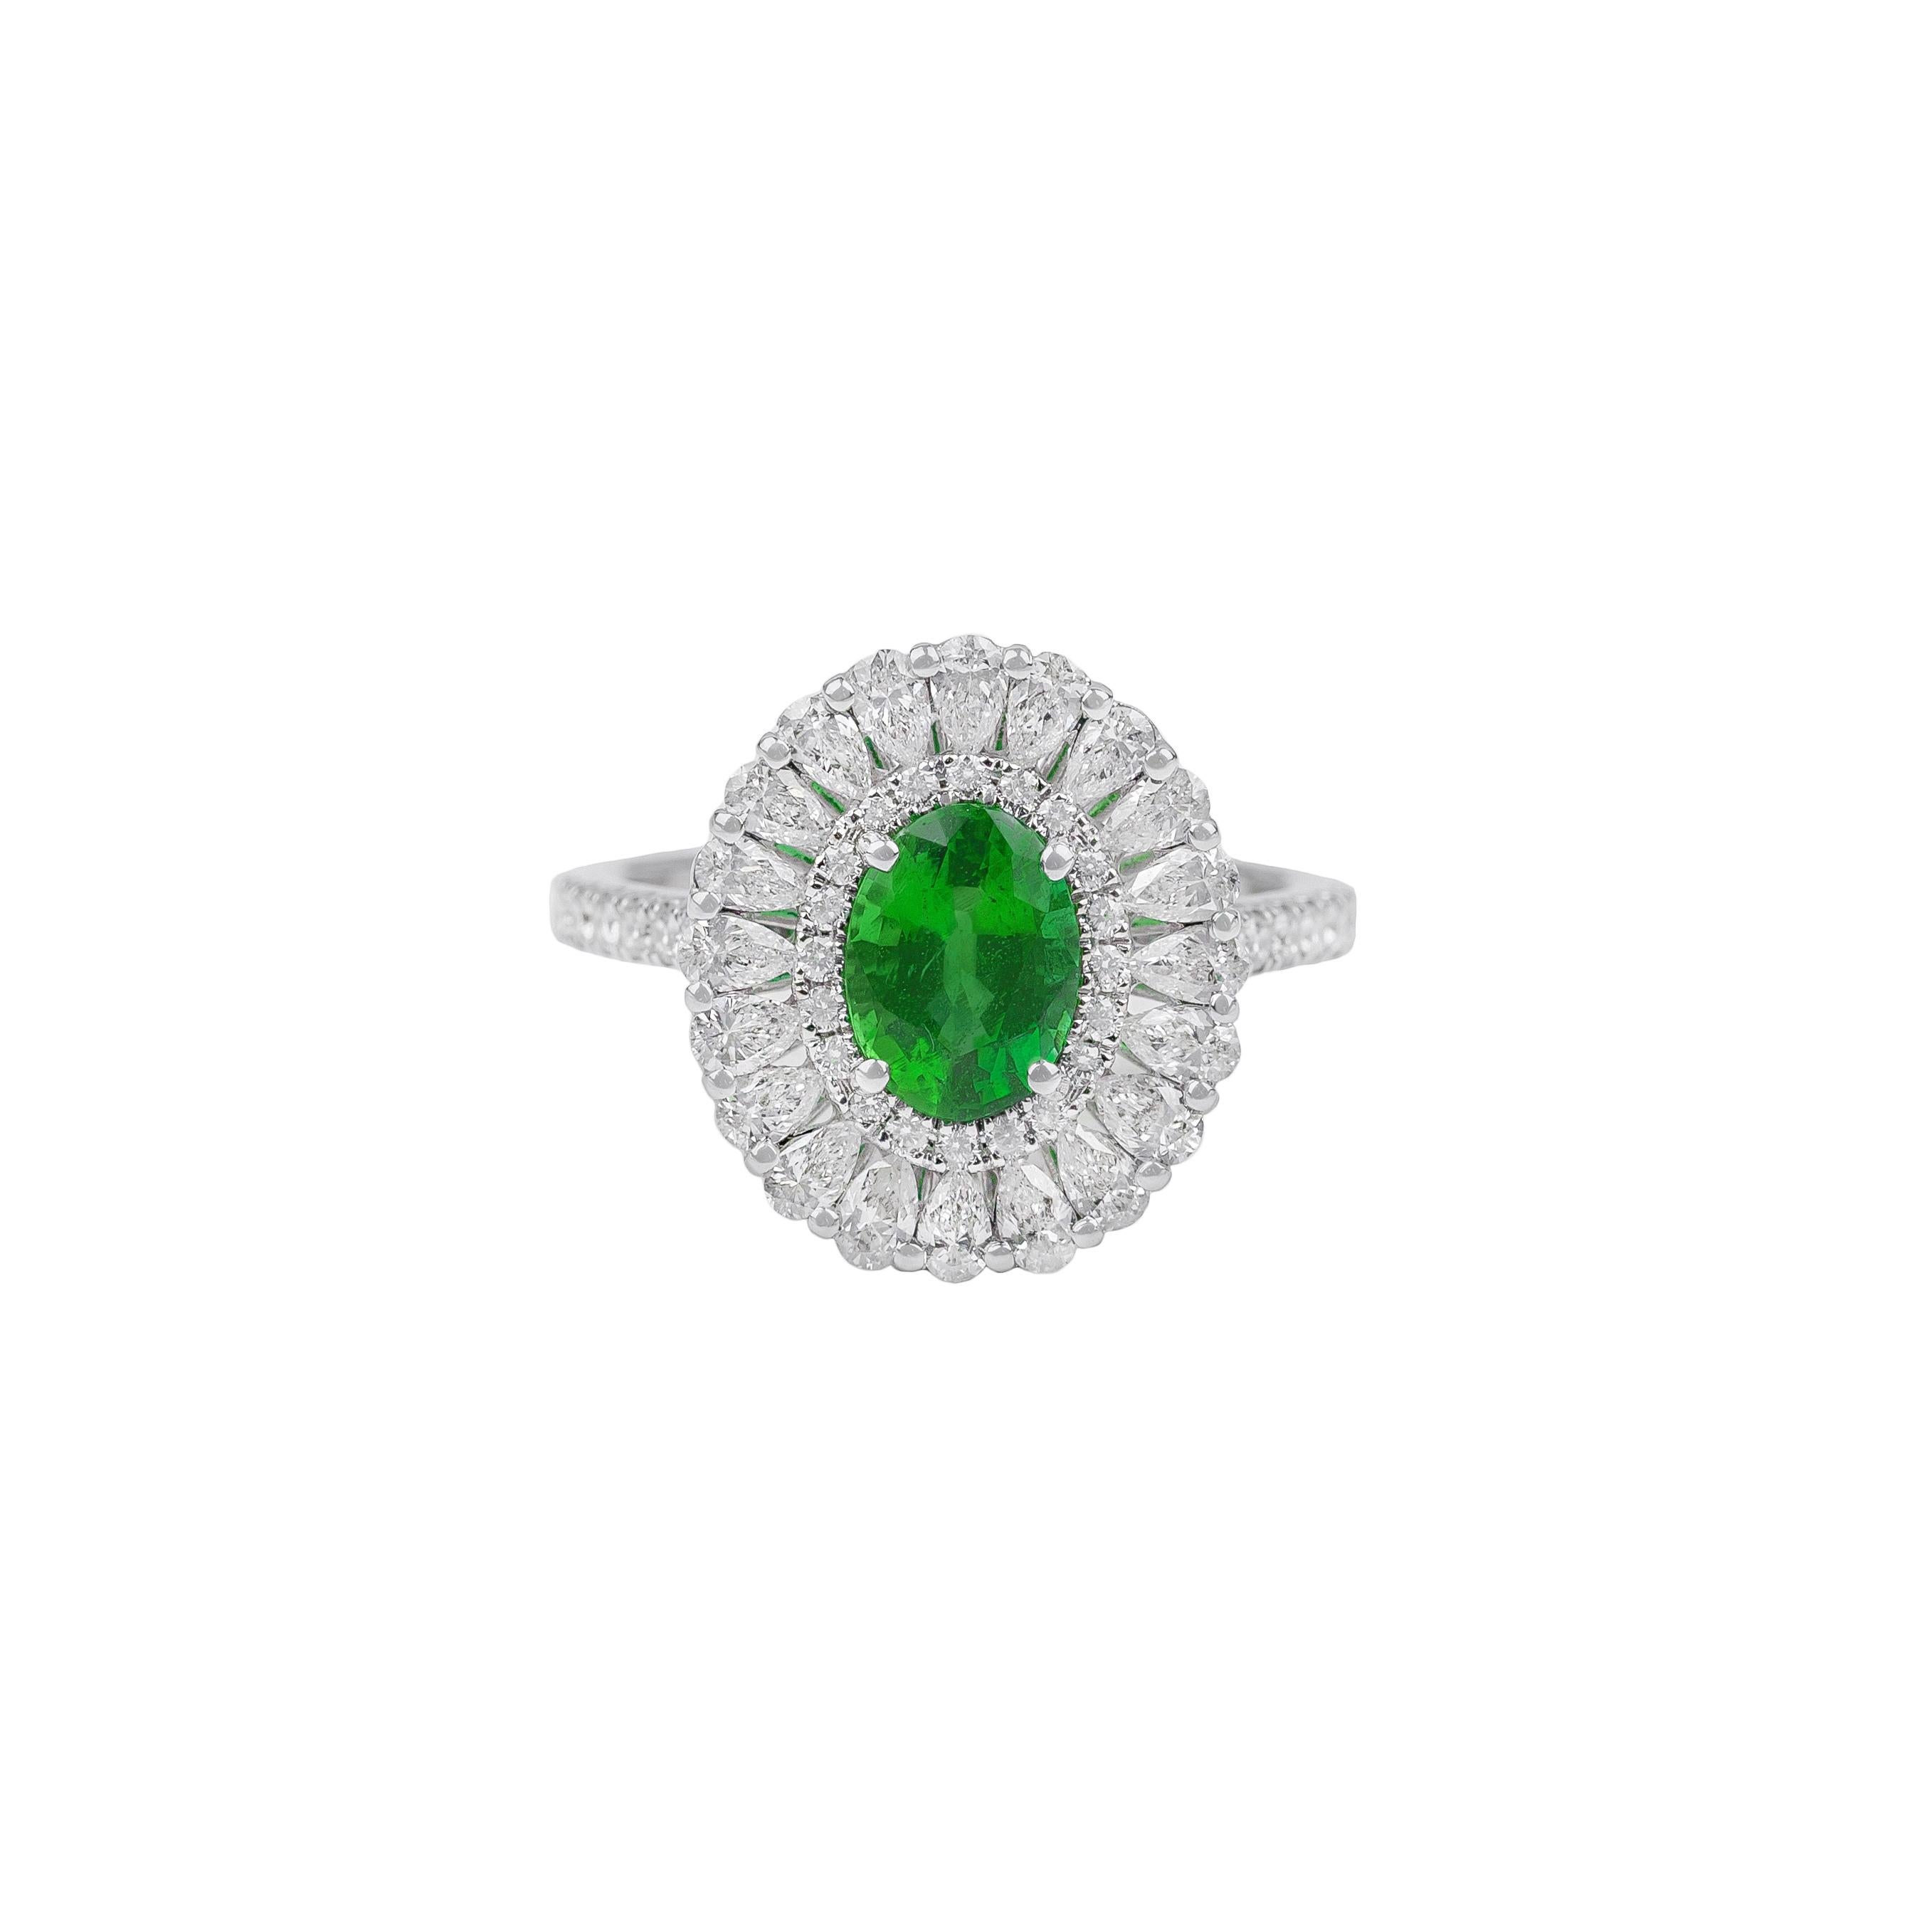 For Sale:  18 White Gold, Emerald and White Diamonds Ring 2